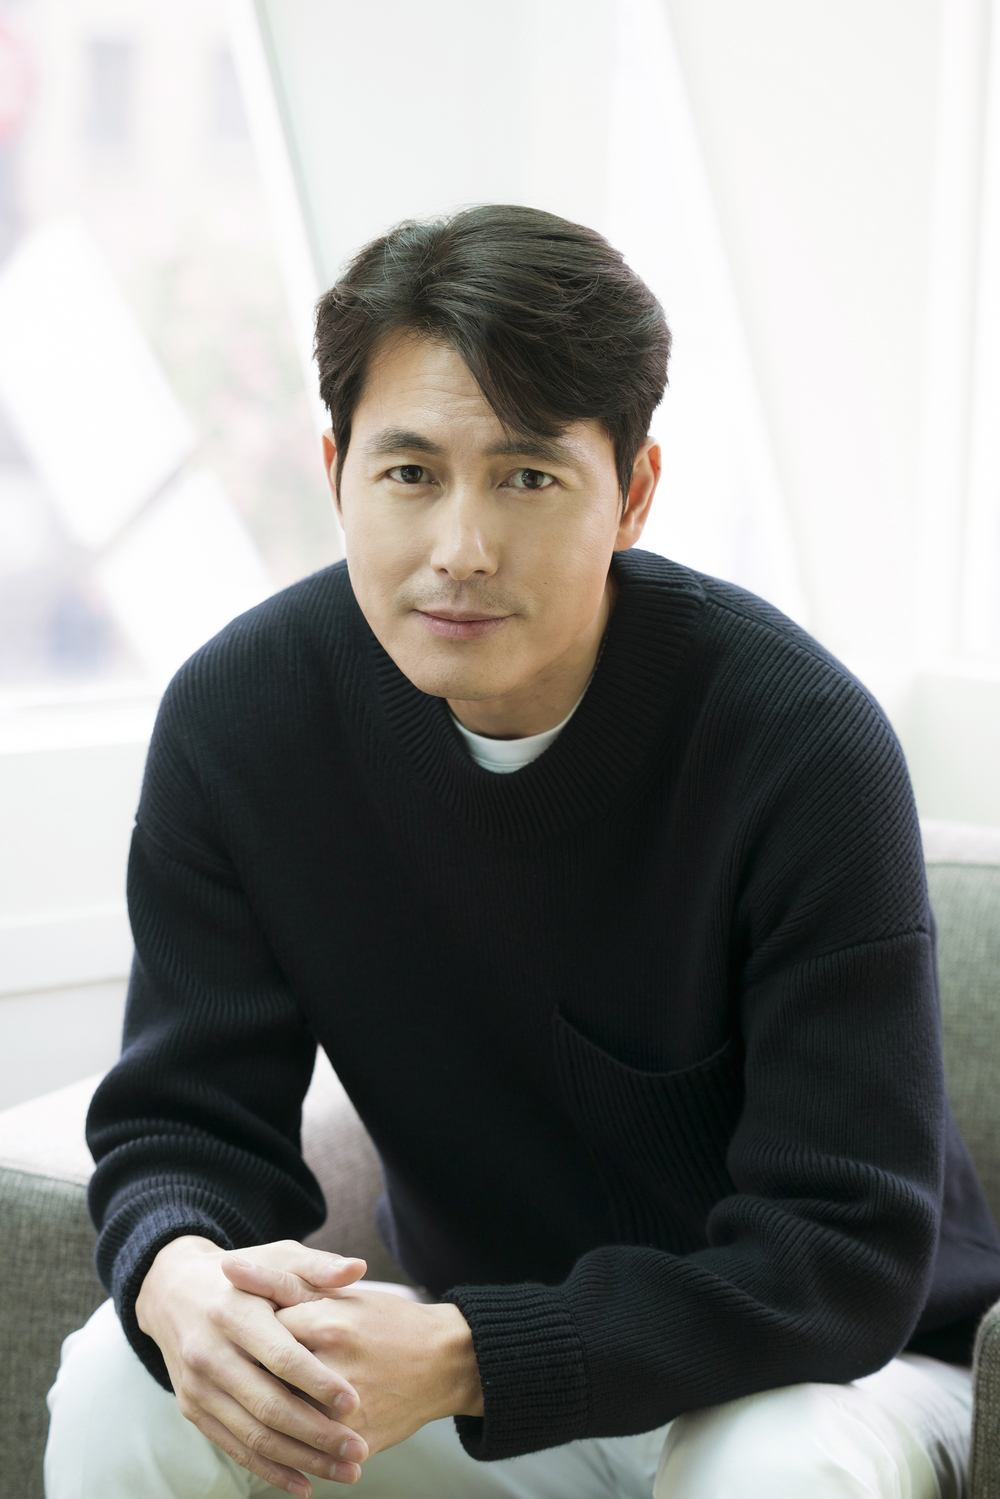 Jung Woo-sung emphasized that it was not a strong role, but there was no awkwardness at all.Actor Jung Woo-sung, who appeared in the movie Innocent Witness, revealed his feelings of watching the movie at an interview held at a cafe in Samcheong-dong on the morning of January 22.First, Jung Woo-sung said, All the scenarios gave me was that, of course, some actors make strategic judgments in terms of planning, but I am not so Choices.As soon as I covered the scenario, I decided as soon as my mind moved.In the case of Innocent Witness, I decided to cover the scenario and make this decision. Jung Woo-sung showed satisfaction with the result.I read the scenario and personal satisfaction was a big scenario, so I did a movie, but I was nervous about how it would be seen as a Choices movie while ignoring the size of commercial movies, said Jung Woo-sung, who said, After the premiere, I thought that many people gave me the emotions I felt.Jung Woo-sung said, I felt the feeling of looking back at me in the sympathy, the question that Ji-woo throws, but eventually I could not answer it myself, but I wanted to feel the warmth in it that I could look at the child purely in it, which makes me look back. It was good to feel such things together enough. Jung Woo-sung has been attracting attention by playing a soft role through Innocent Witness, which has been playing a character-oriented character.However, Jung Woo-sung said, It was not awkward. Signes extérieurs de richesse, such everyday emotional expression is much more Signes extérieurs de richesse.If you look at the previous character, you should have constant tension not to damage your opponent, but you do not have to do it here.When I treated pure objects like Ji-woo, it was much more so, so there was much richer expression and freedom. bak-beauty